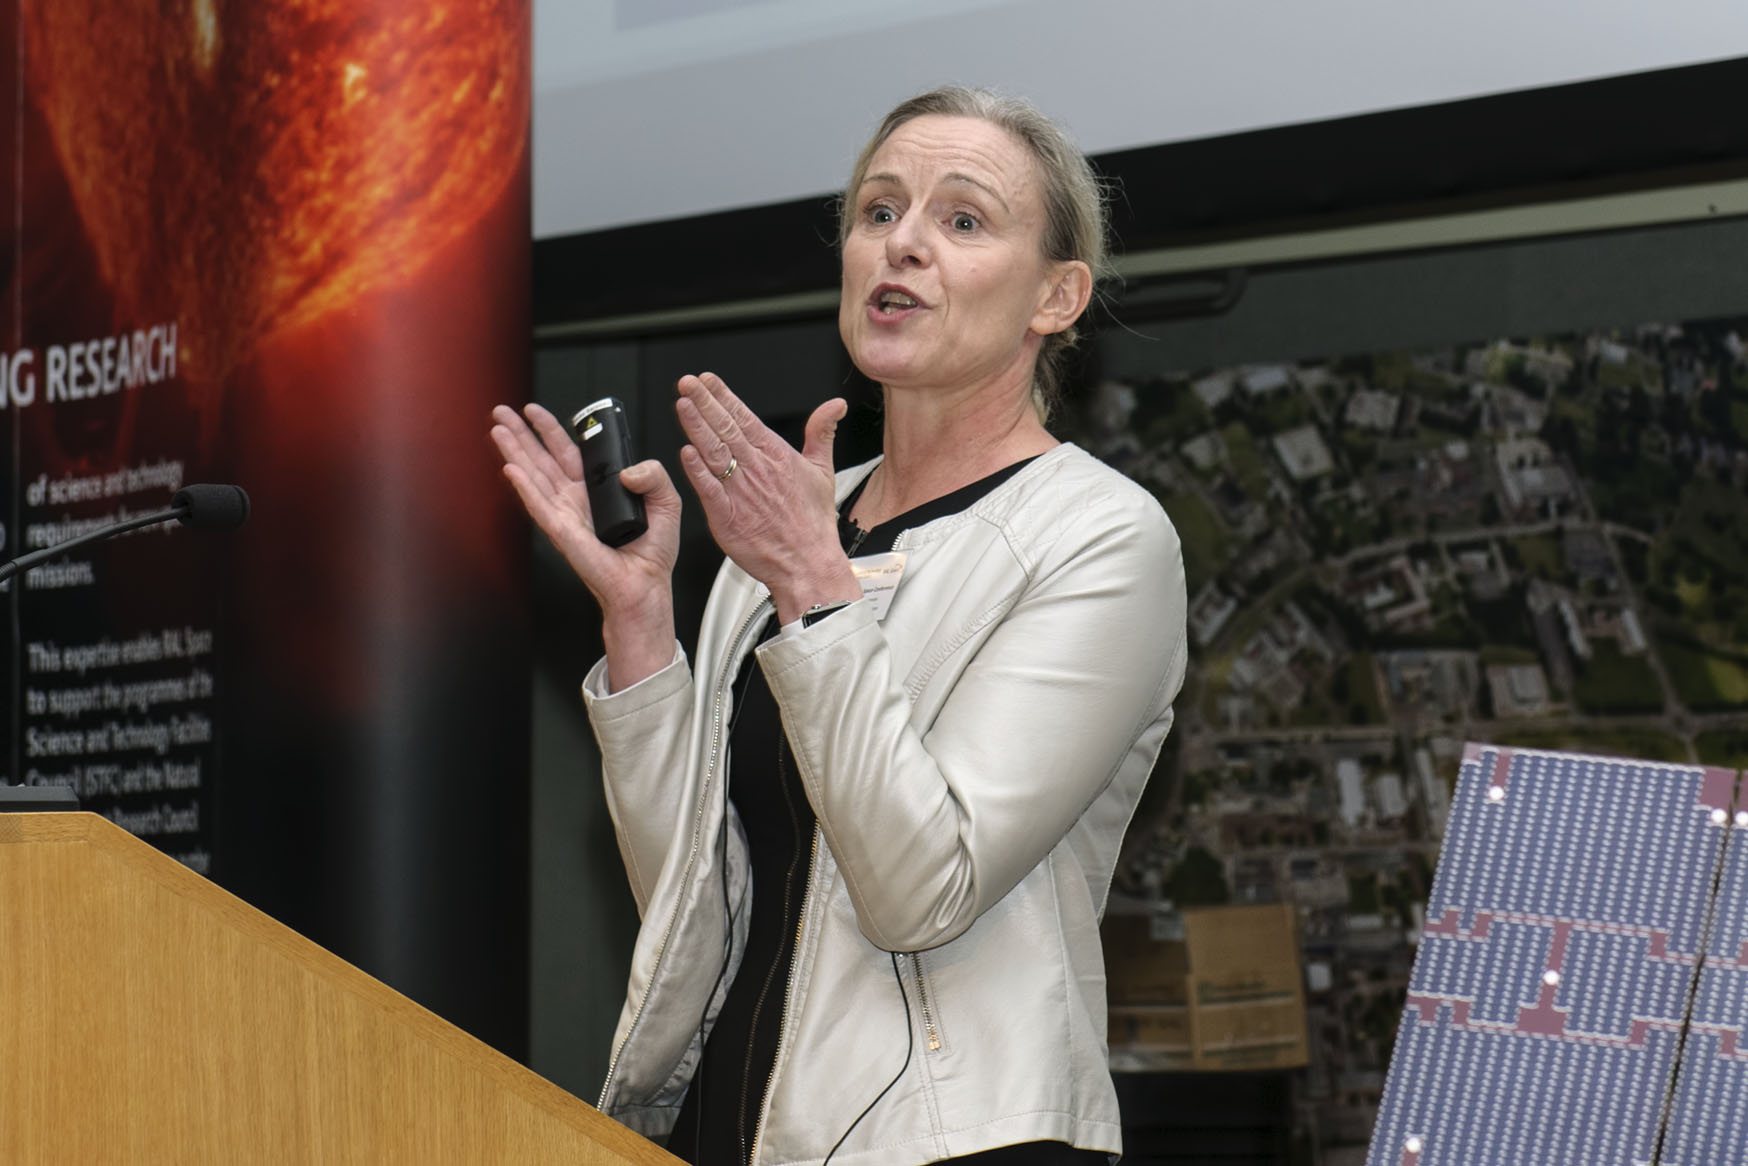 Dr Theresa Moretto Jorgensen (Program Director, Space Weather Research, NSF)